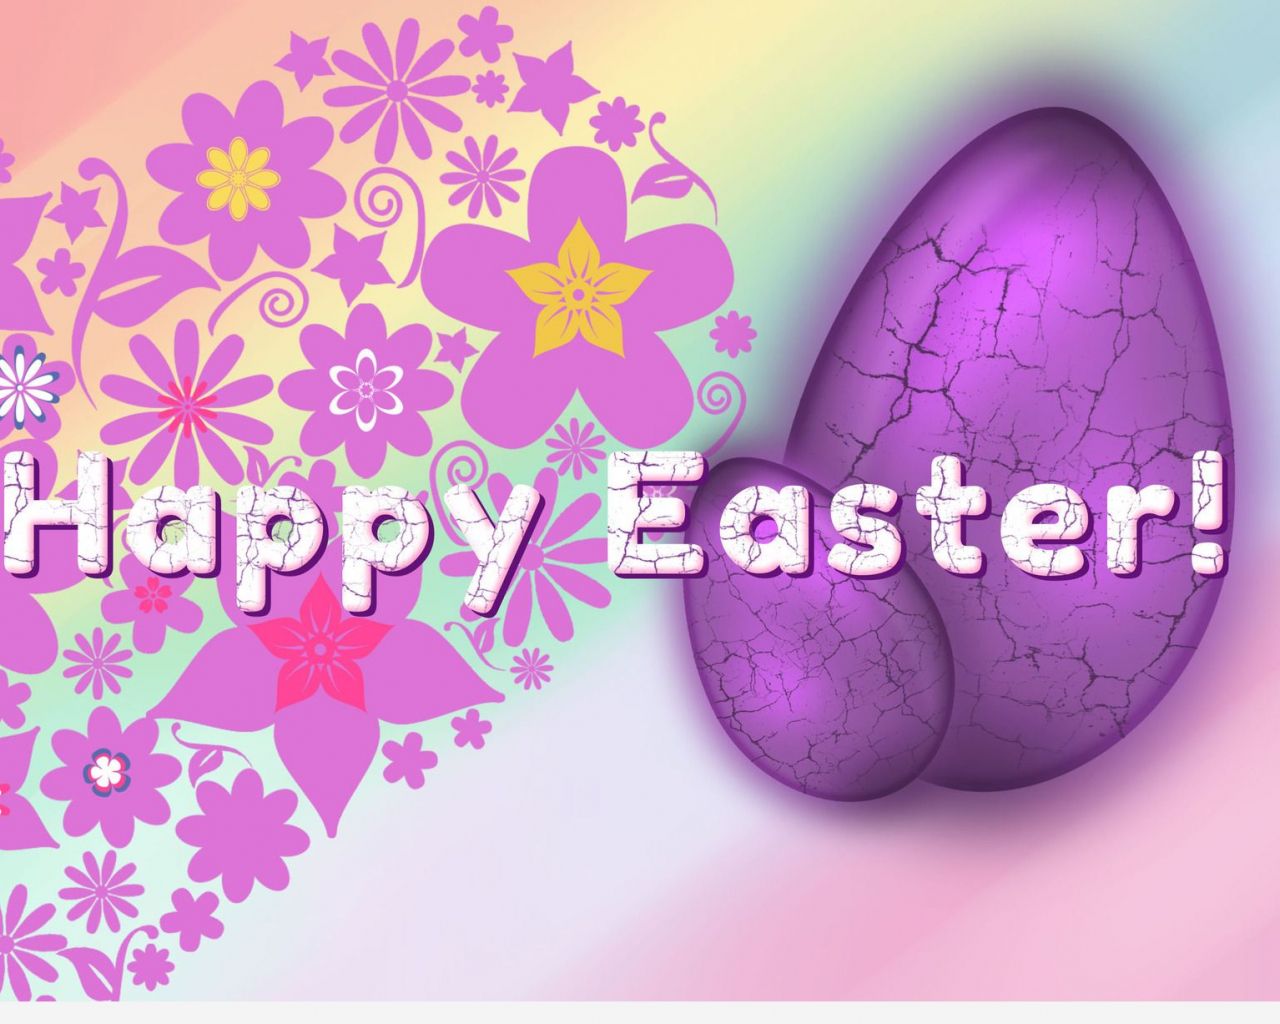 Free download Happy Easter wallpaper and quotes 2015 2016 [1920x1227] for your Desktop, Mobile & Tablet. Explore Easter 2016 Wallpaper. Easter Sunday Wallpaper, Microsoft Easter Wallpaper, Happy Easter Wallpaper for Desktop